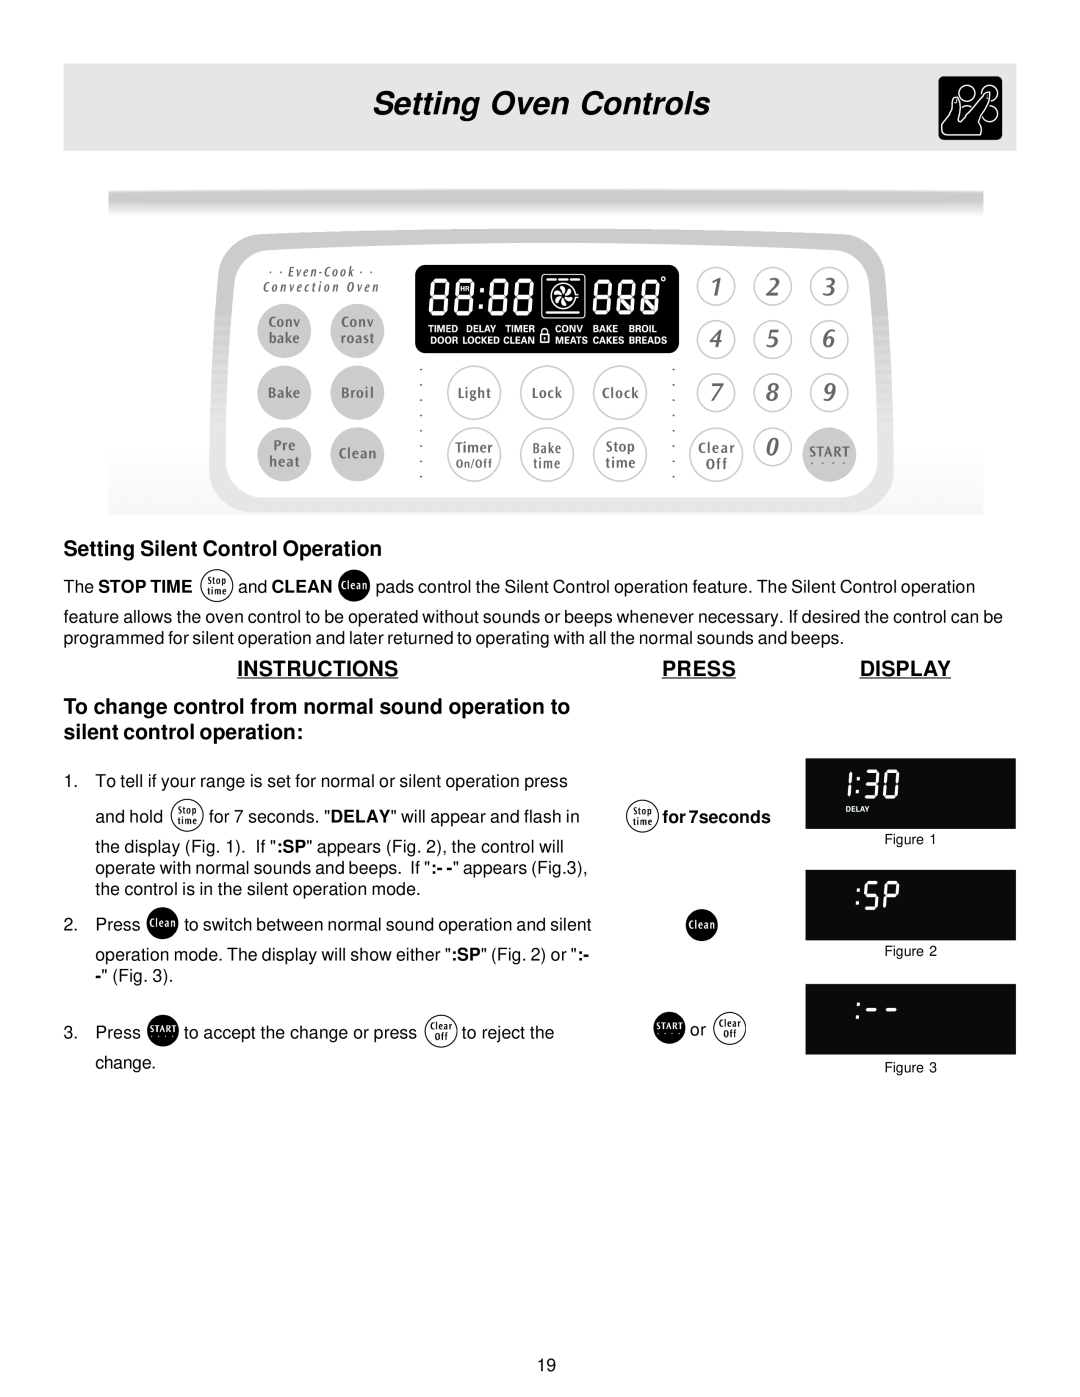 Frigidaire 316257124 Setting Silent Control Operation, Setting Oven Controls, Instructions, Press, Display, for 7seconds 